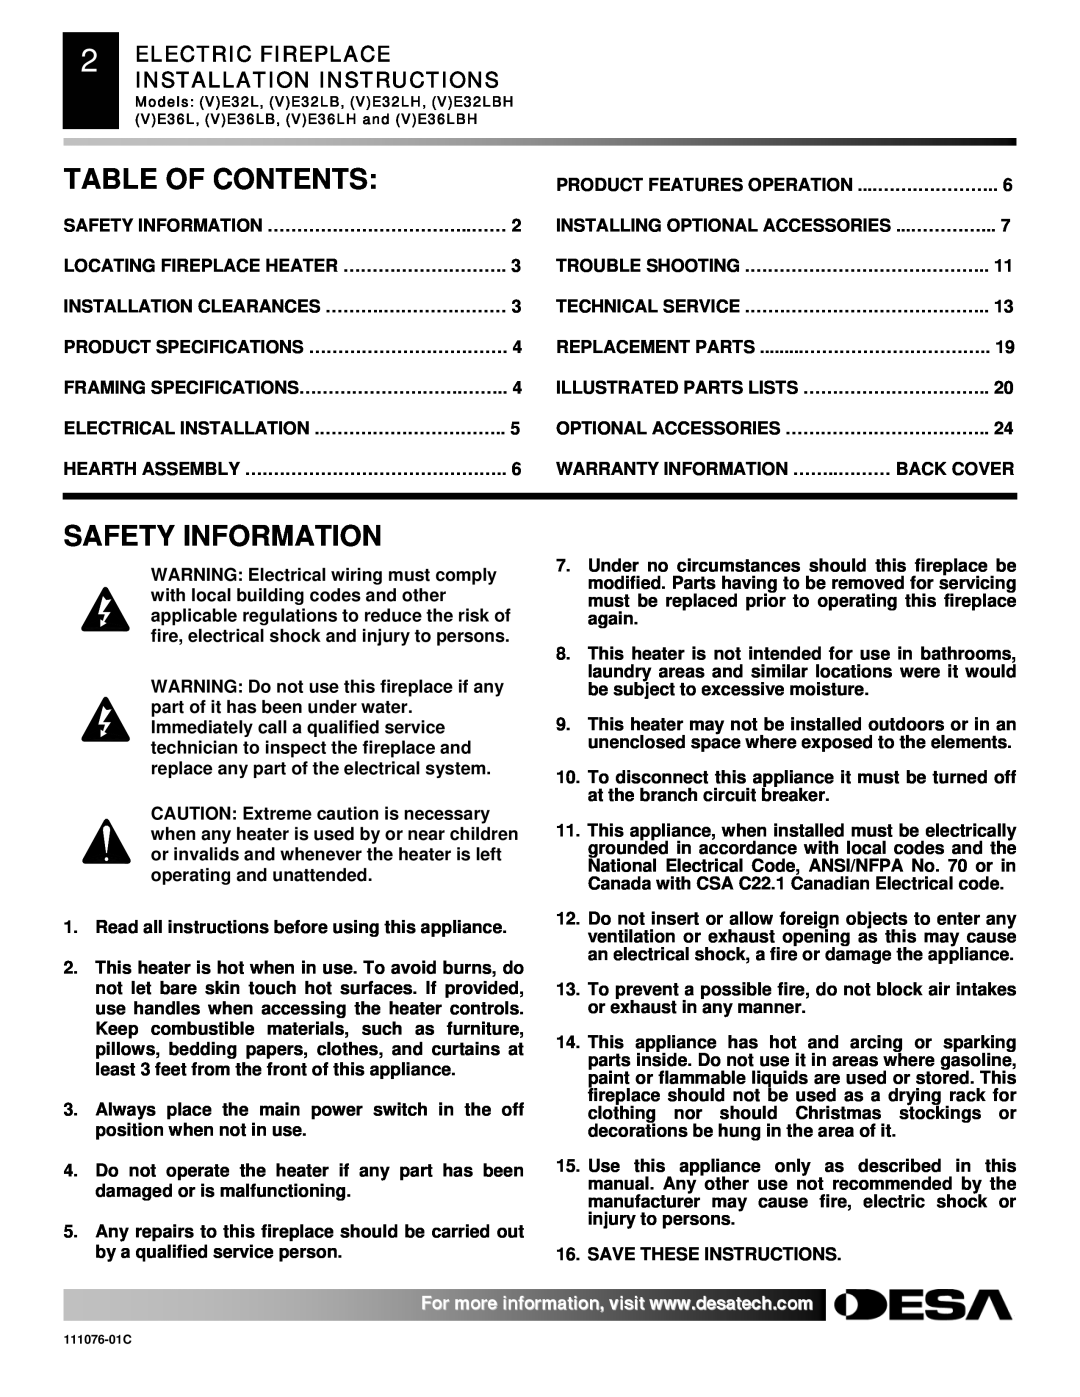 Desa E32, VE36, VE32, E36(L)(B)(H) Table Of Contents, Safety Information, Electric Fireplace Installation Instructions 